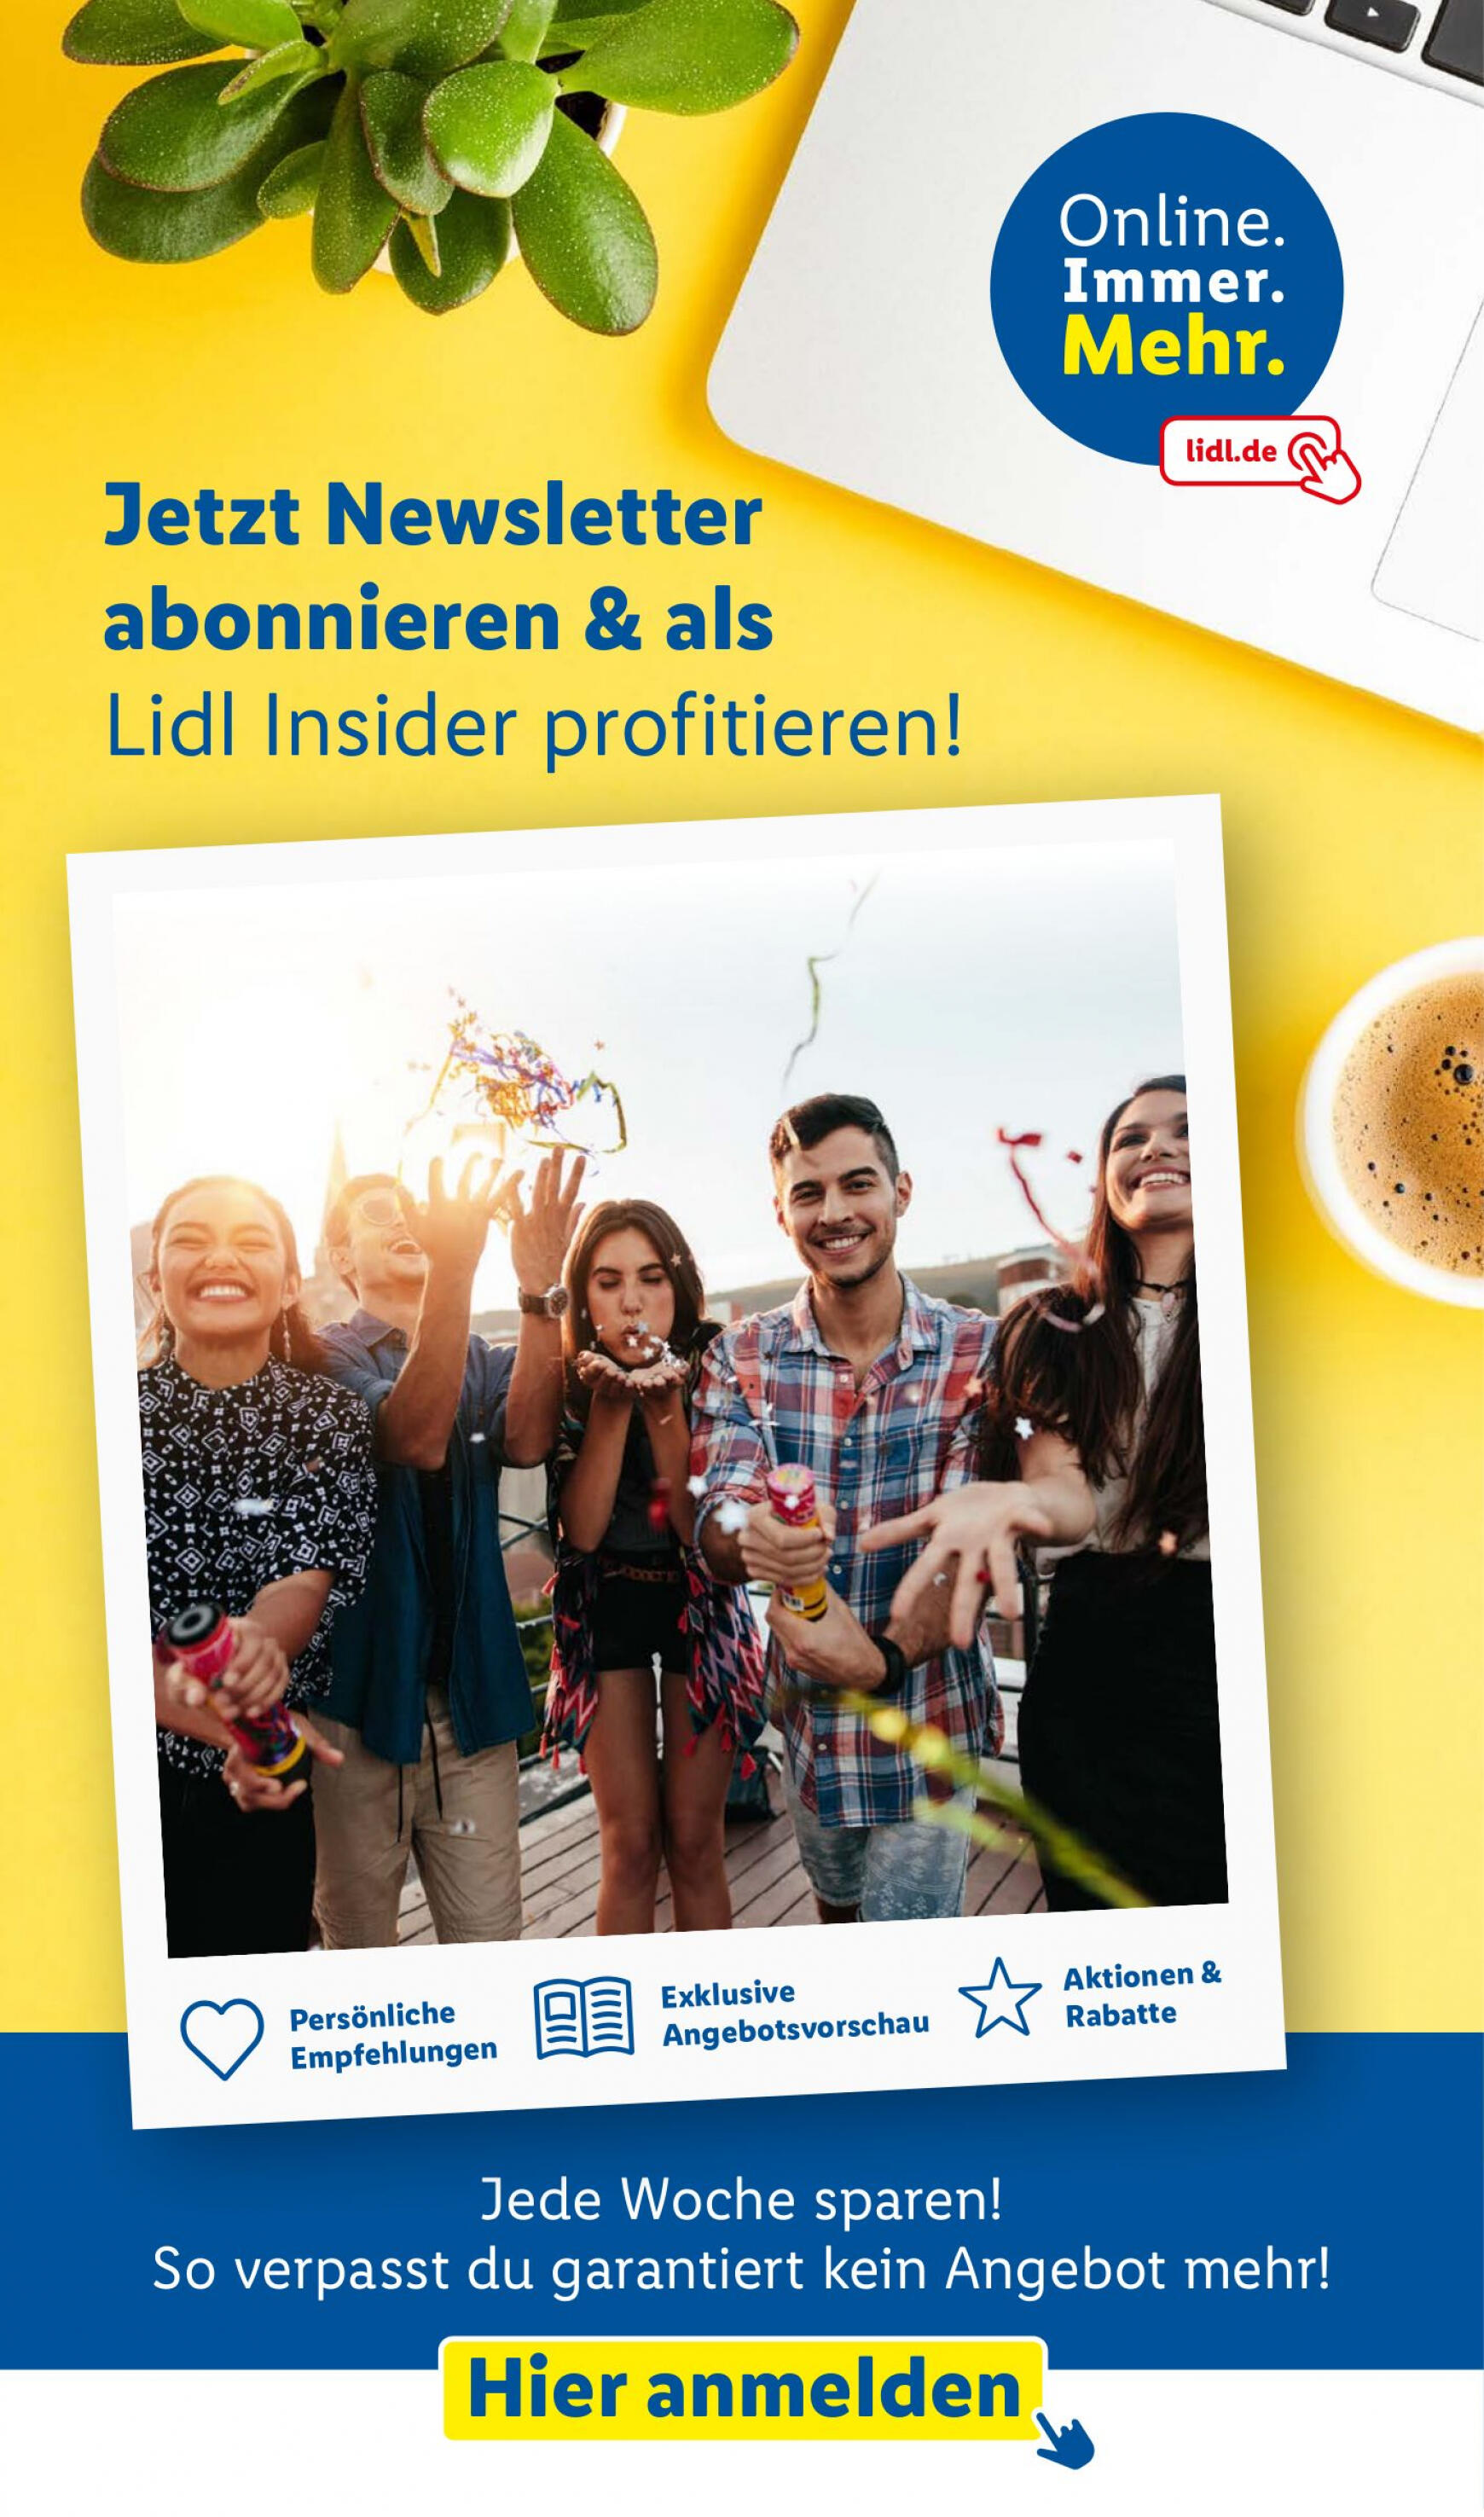 lidl - Flyer Lidl aktuell 29.04. - 04.05. - page: 62